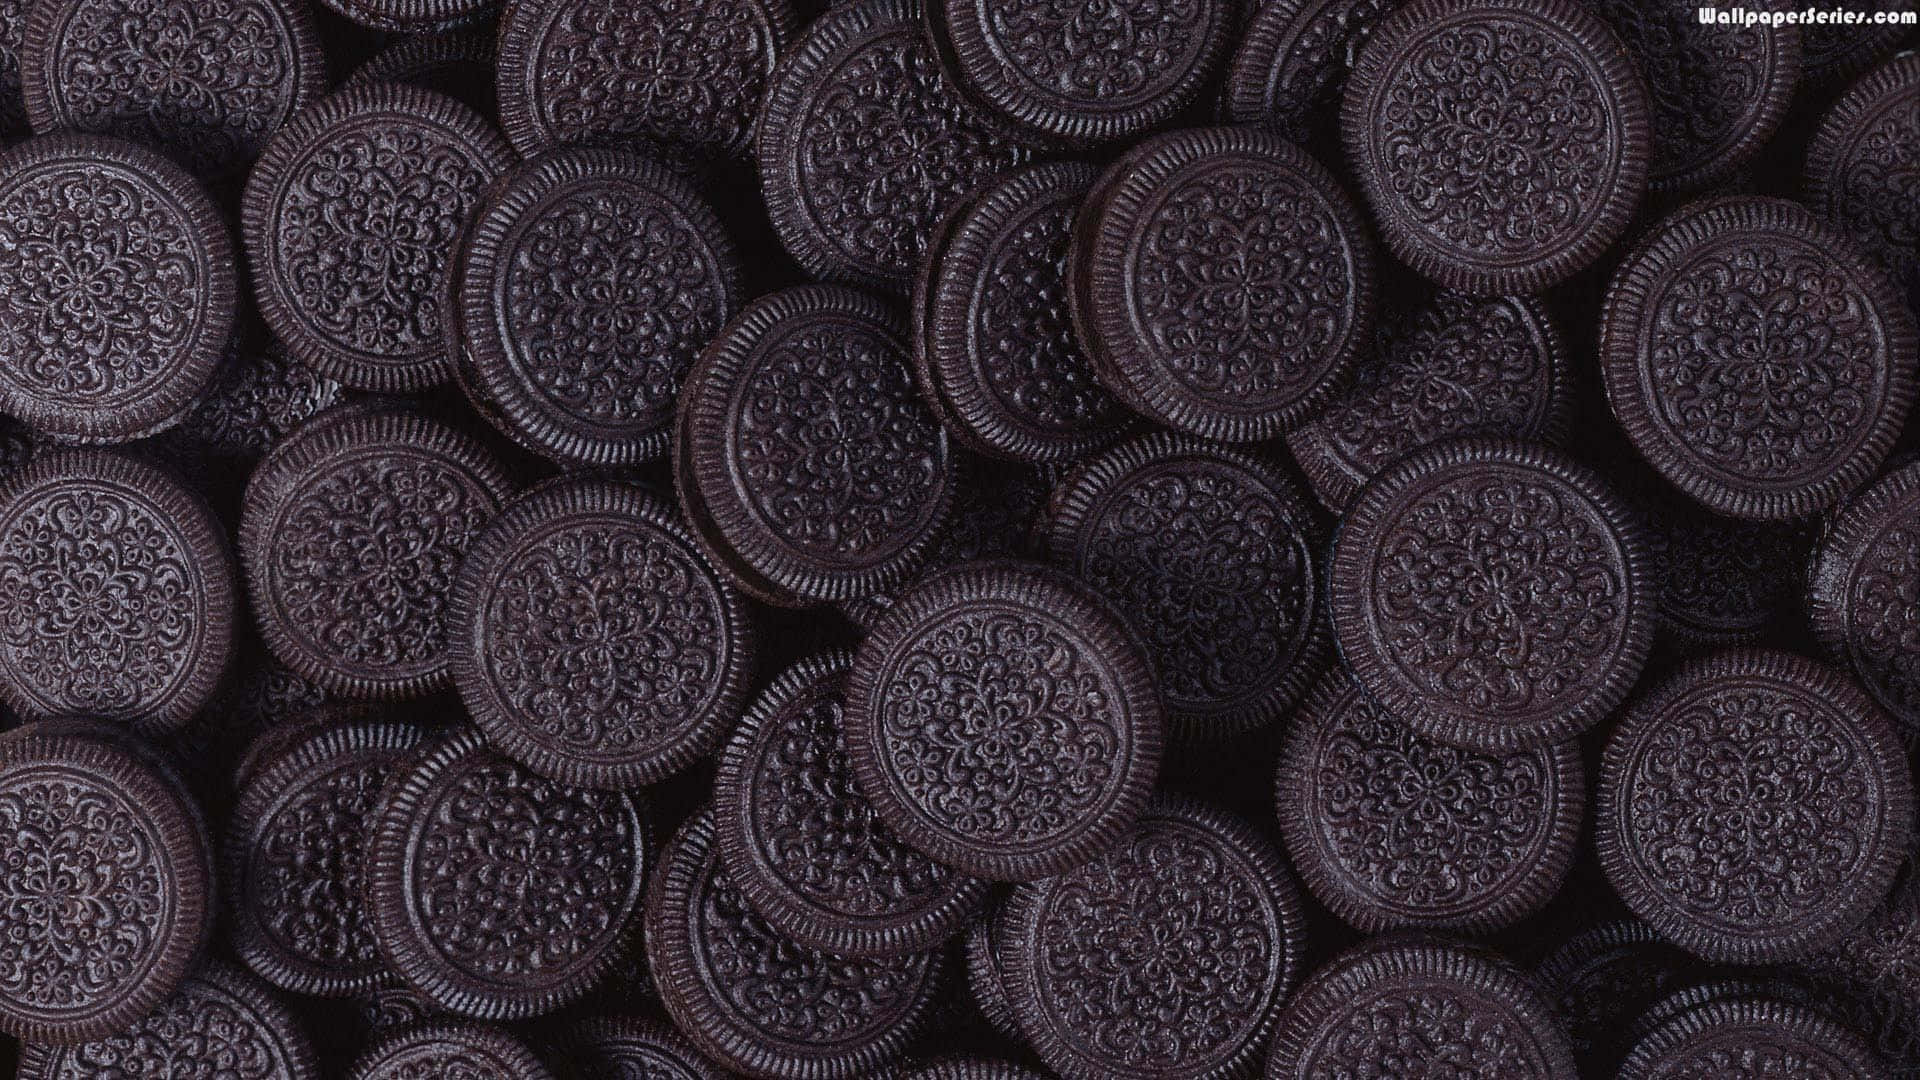 Free Oreo Cookie Wallpaper Downloads, Oreo Cookie Wallpaper for FREE